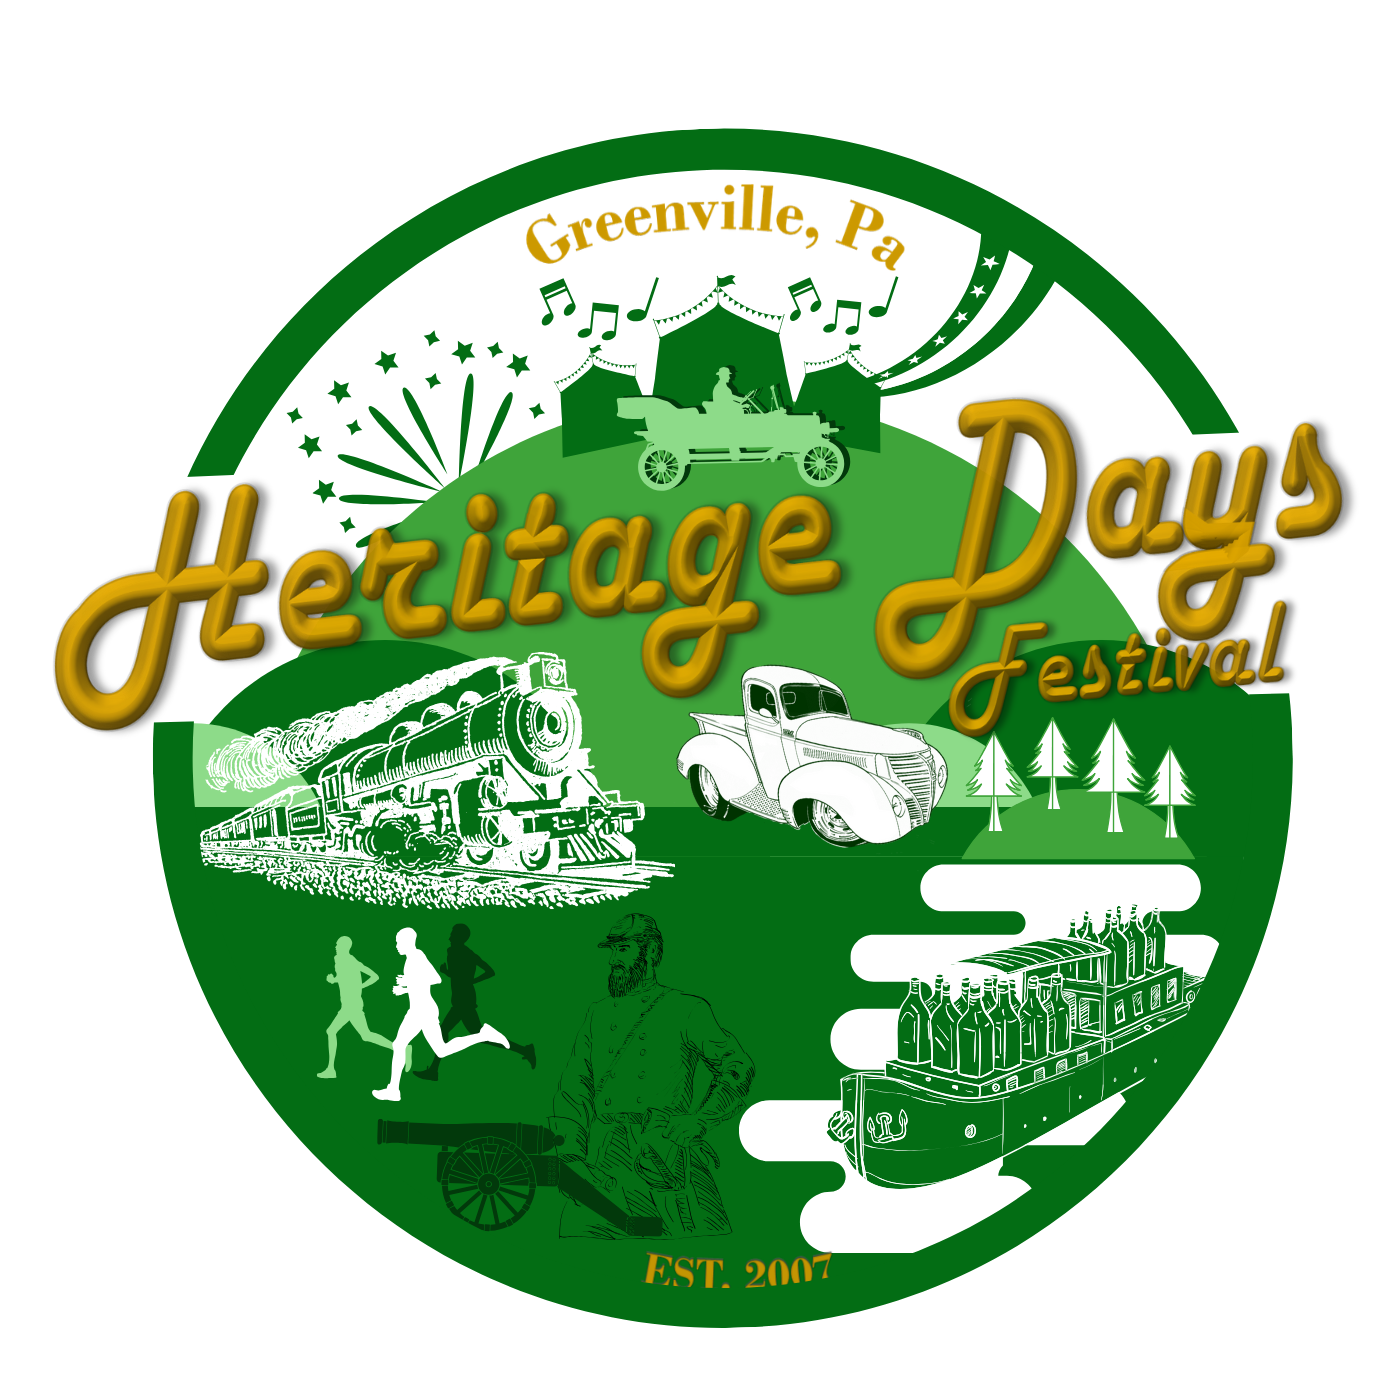 Annual Greenville, PA Heritage Days